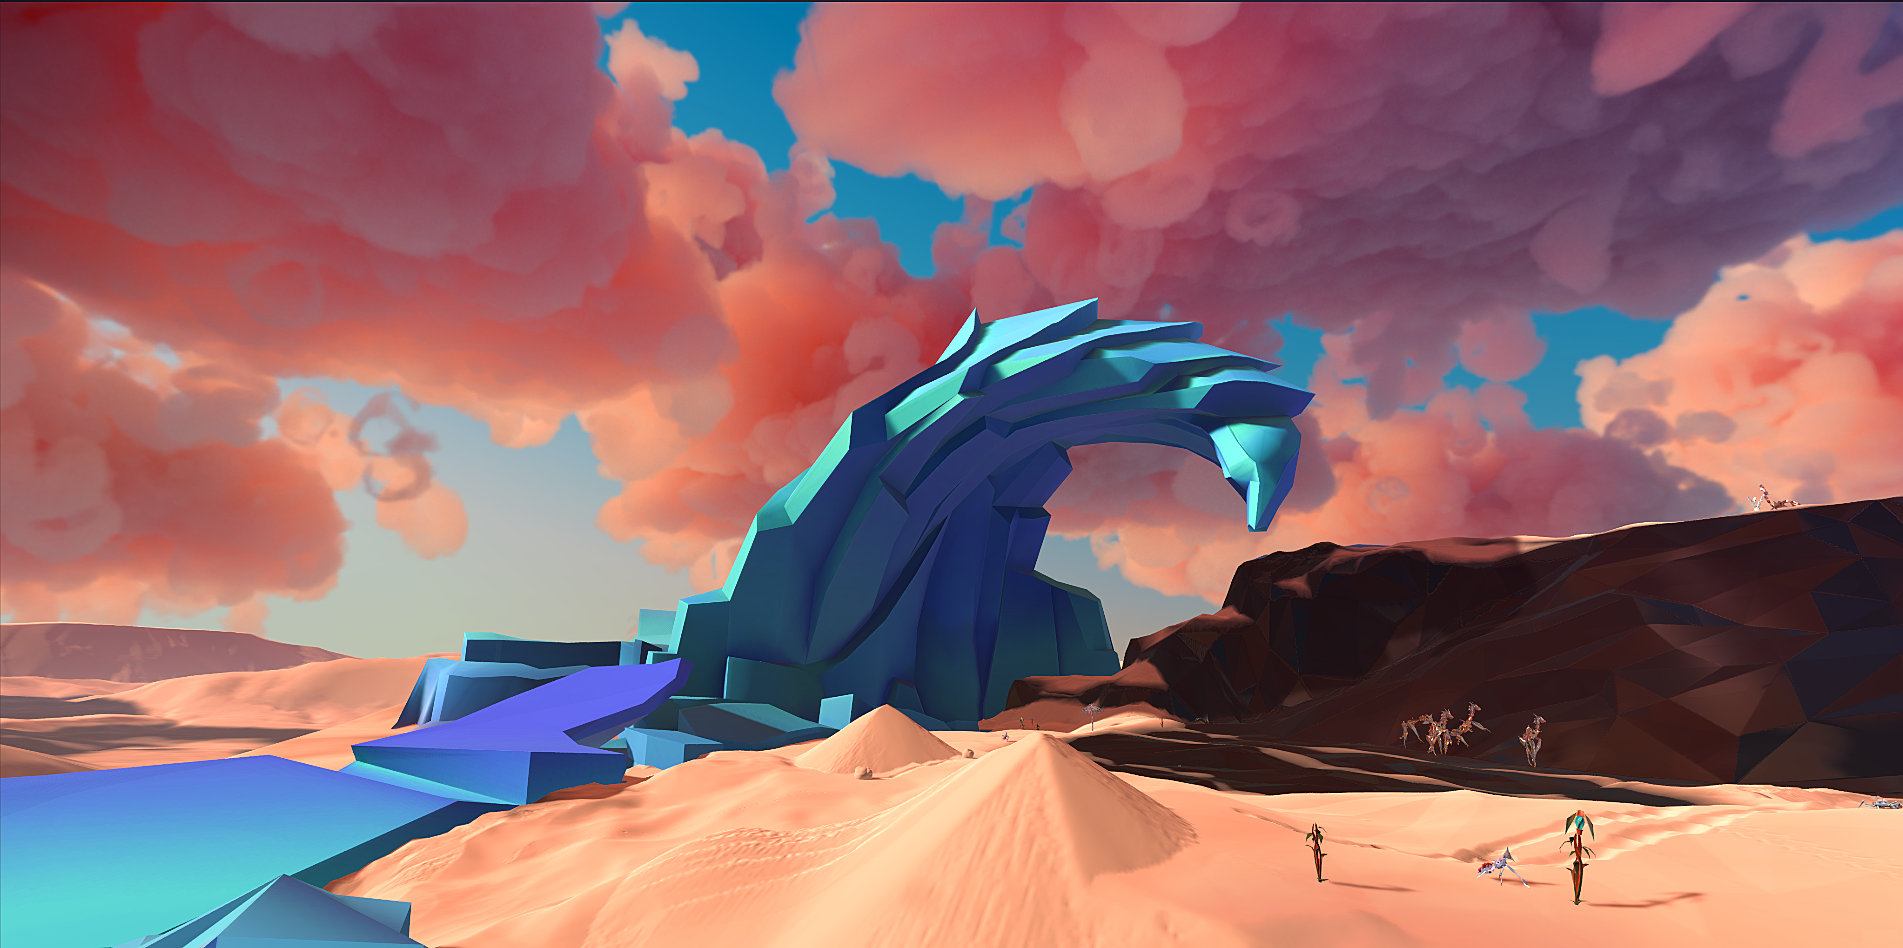 paper beast, eric chahi, another world, psvr, sony, ps4, playstation 4, upload vr, vr